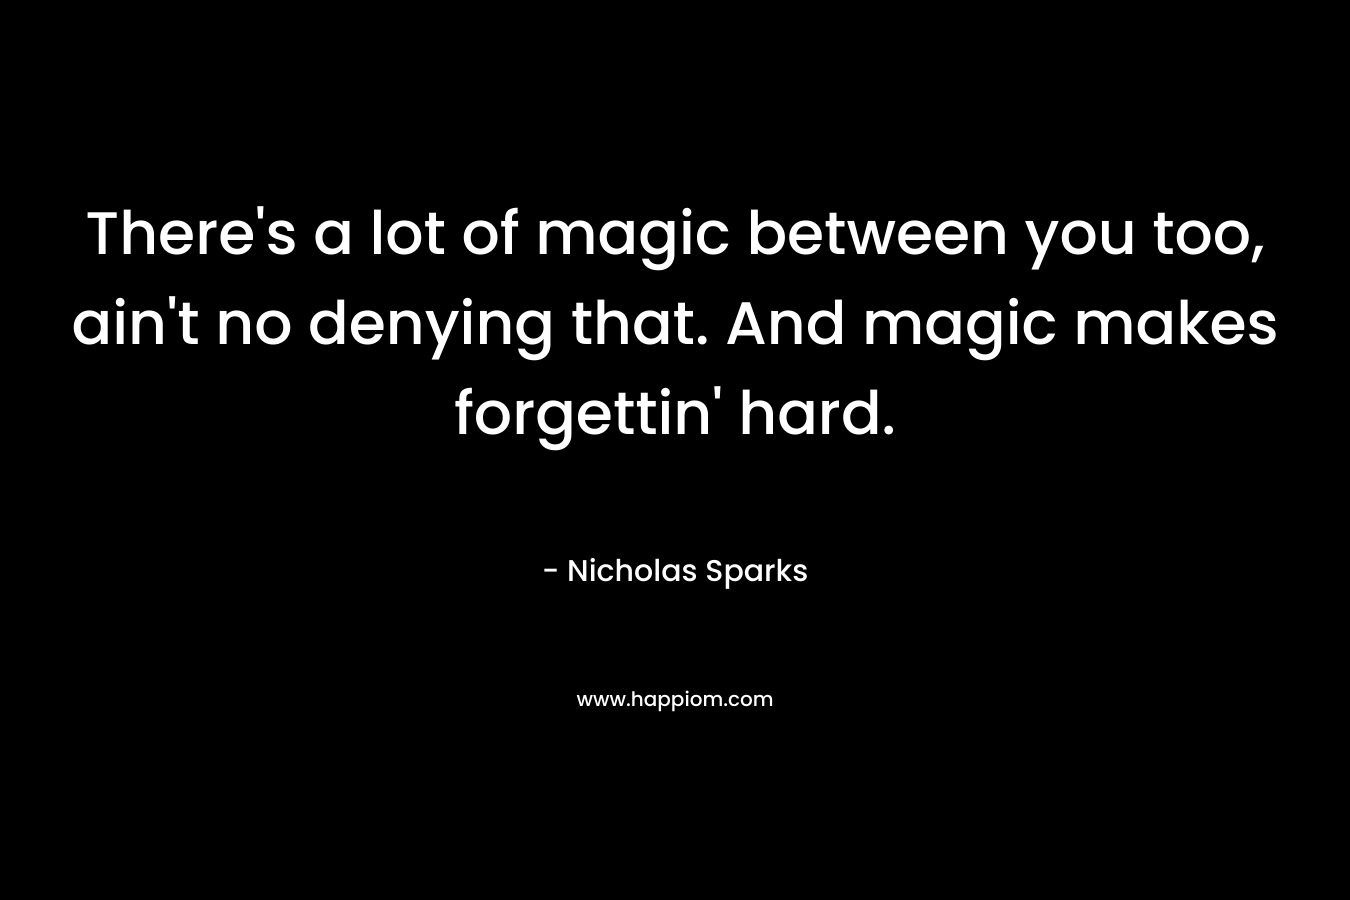 There's a lot of magic between you too, ain't no denying that. And magic makes forgettin' hard.